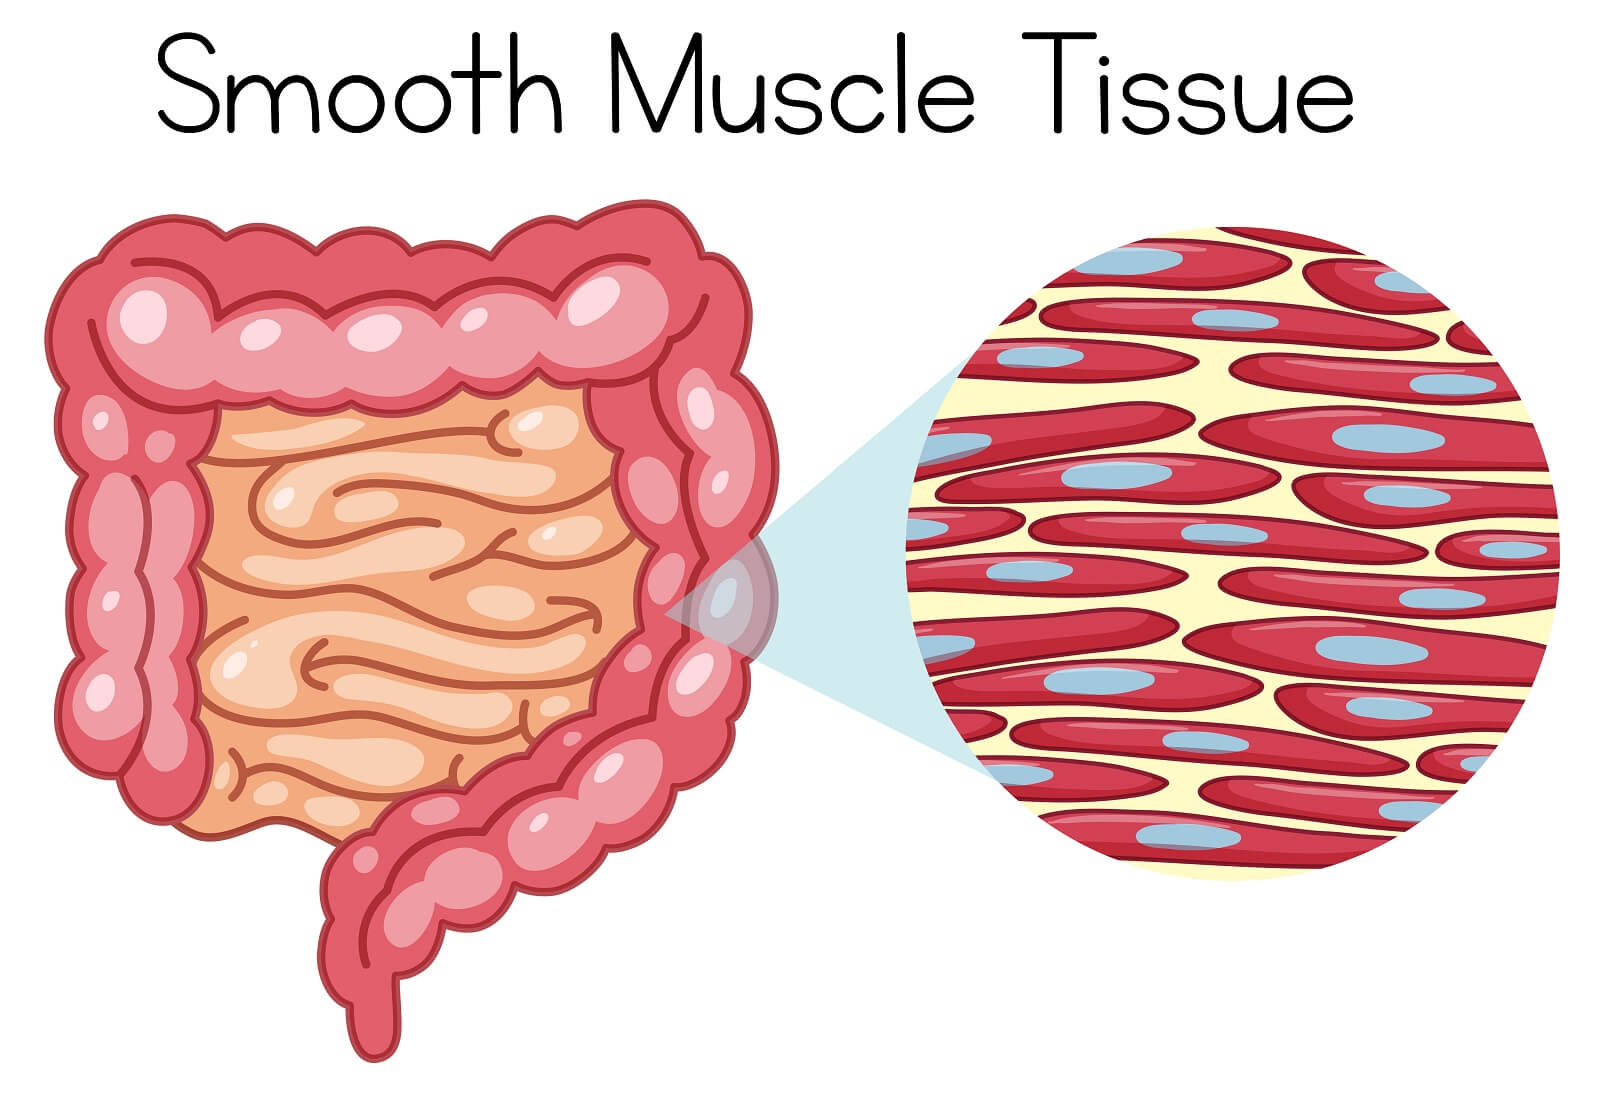 Anatomy of Intestinal Smooth Muscle Tissue illustration.